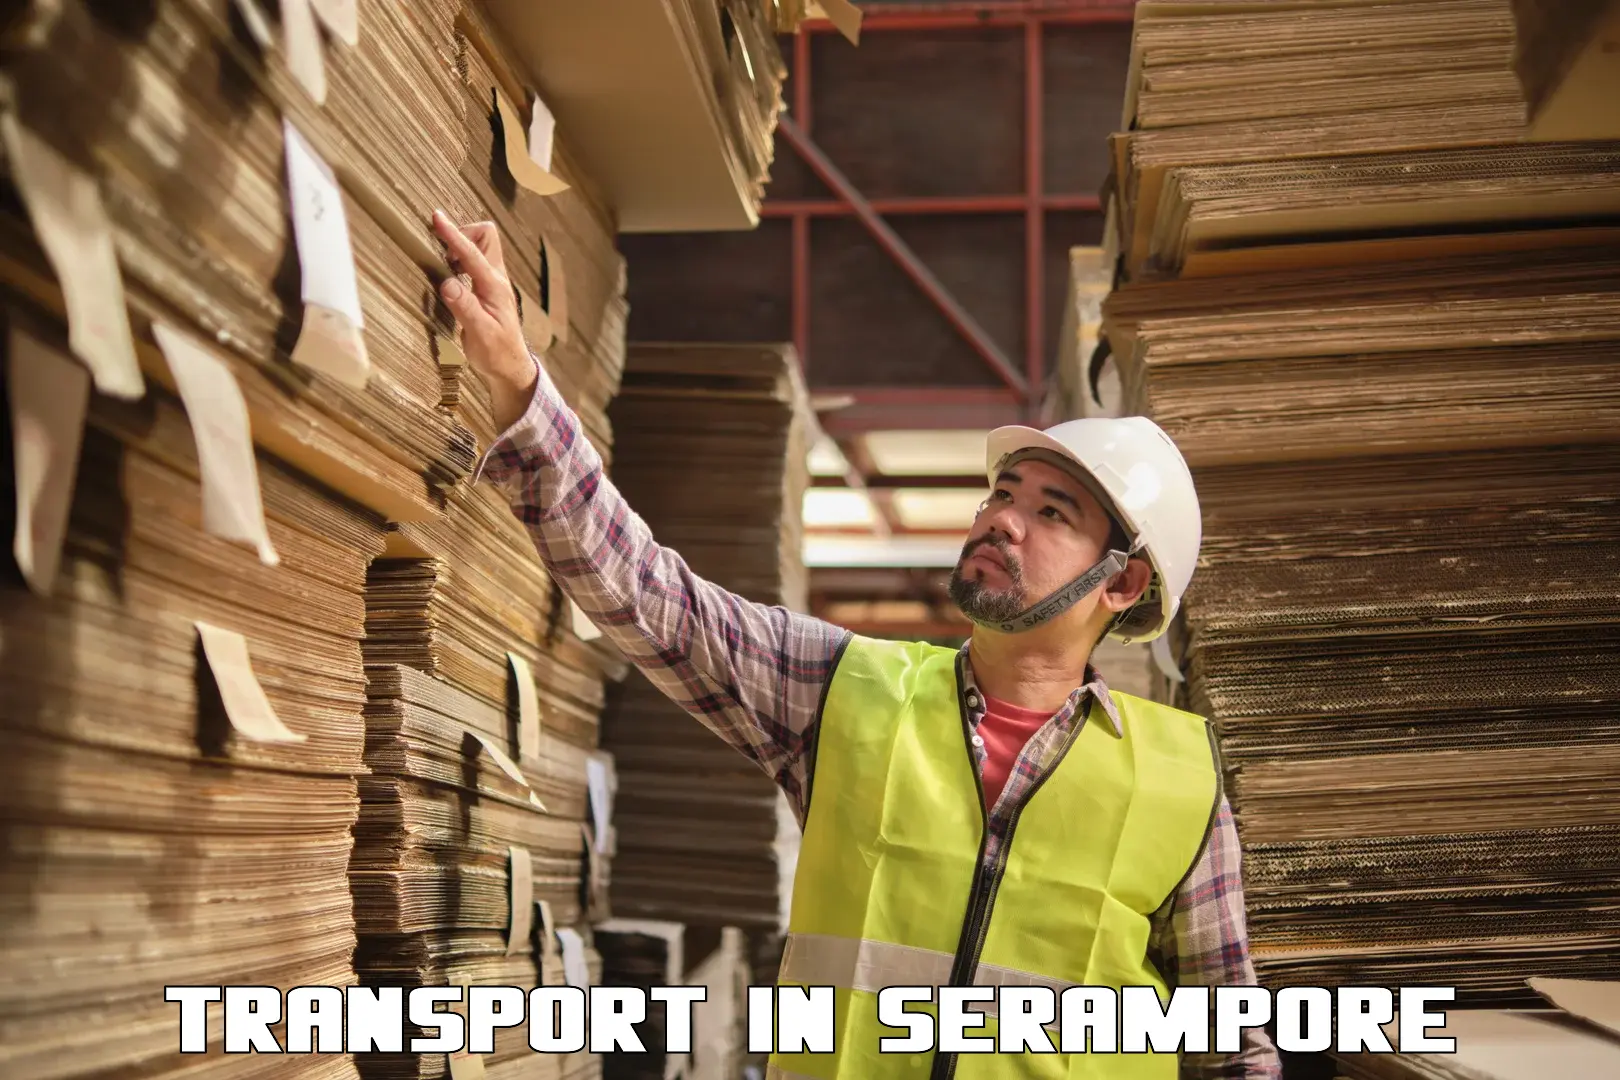 Transport shared services in Serampore